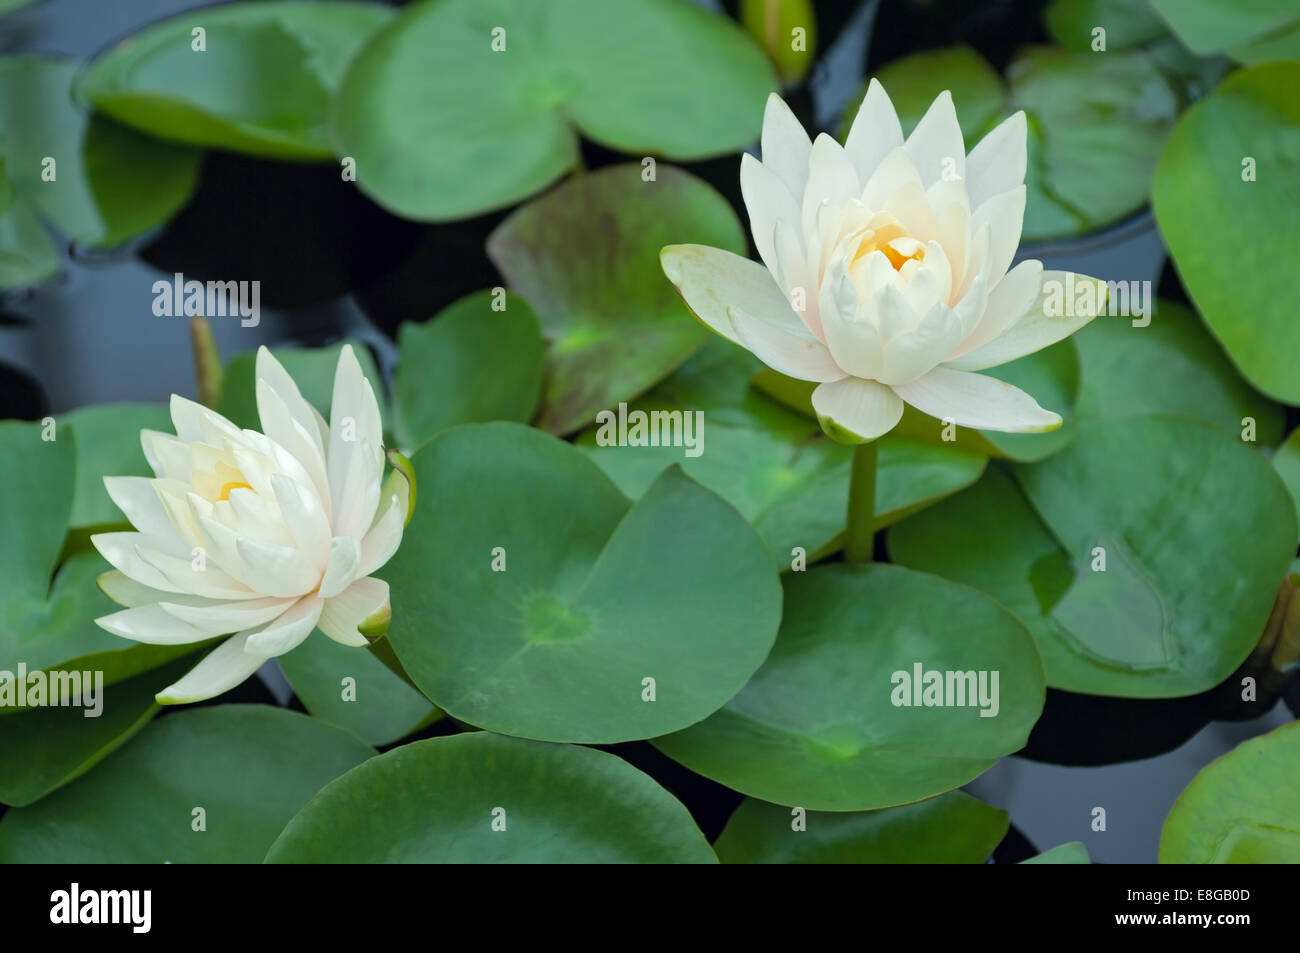 sacred lotus plants or nelumbo nucifera in full bloom atop water surrounded by lily pads Stock Photo